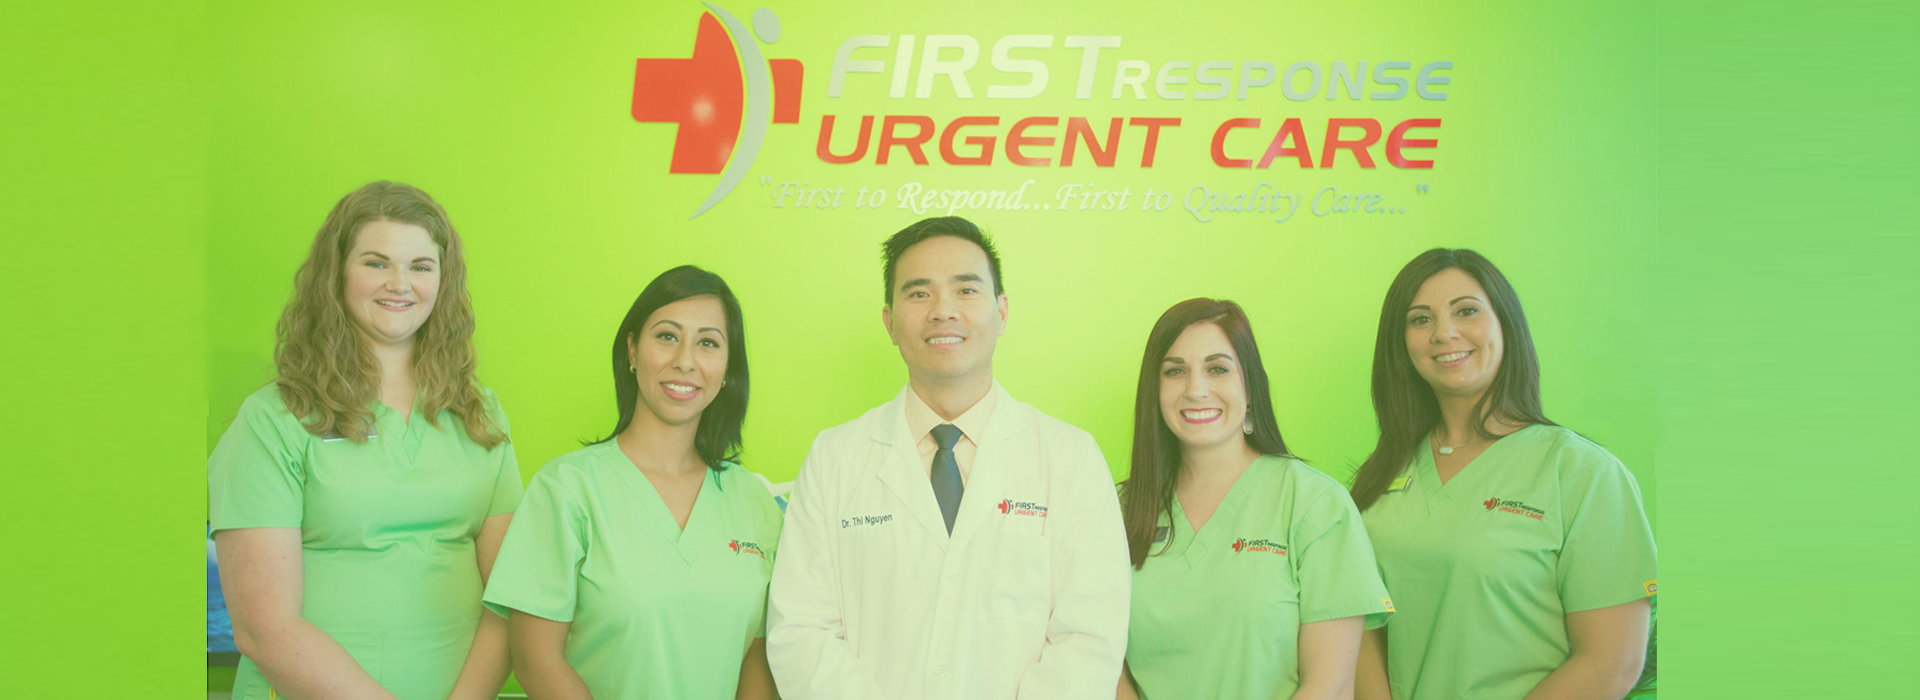 First-Response-Urgent-Care---First to Respond...First to Quality Care...